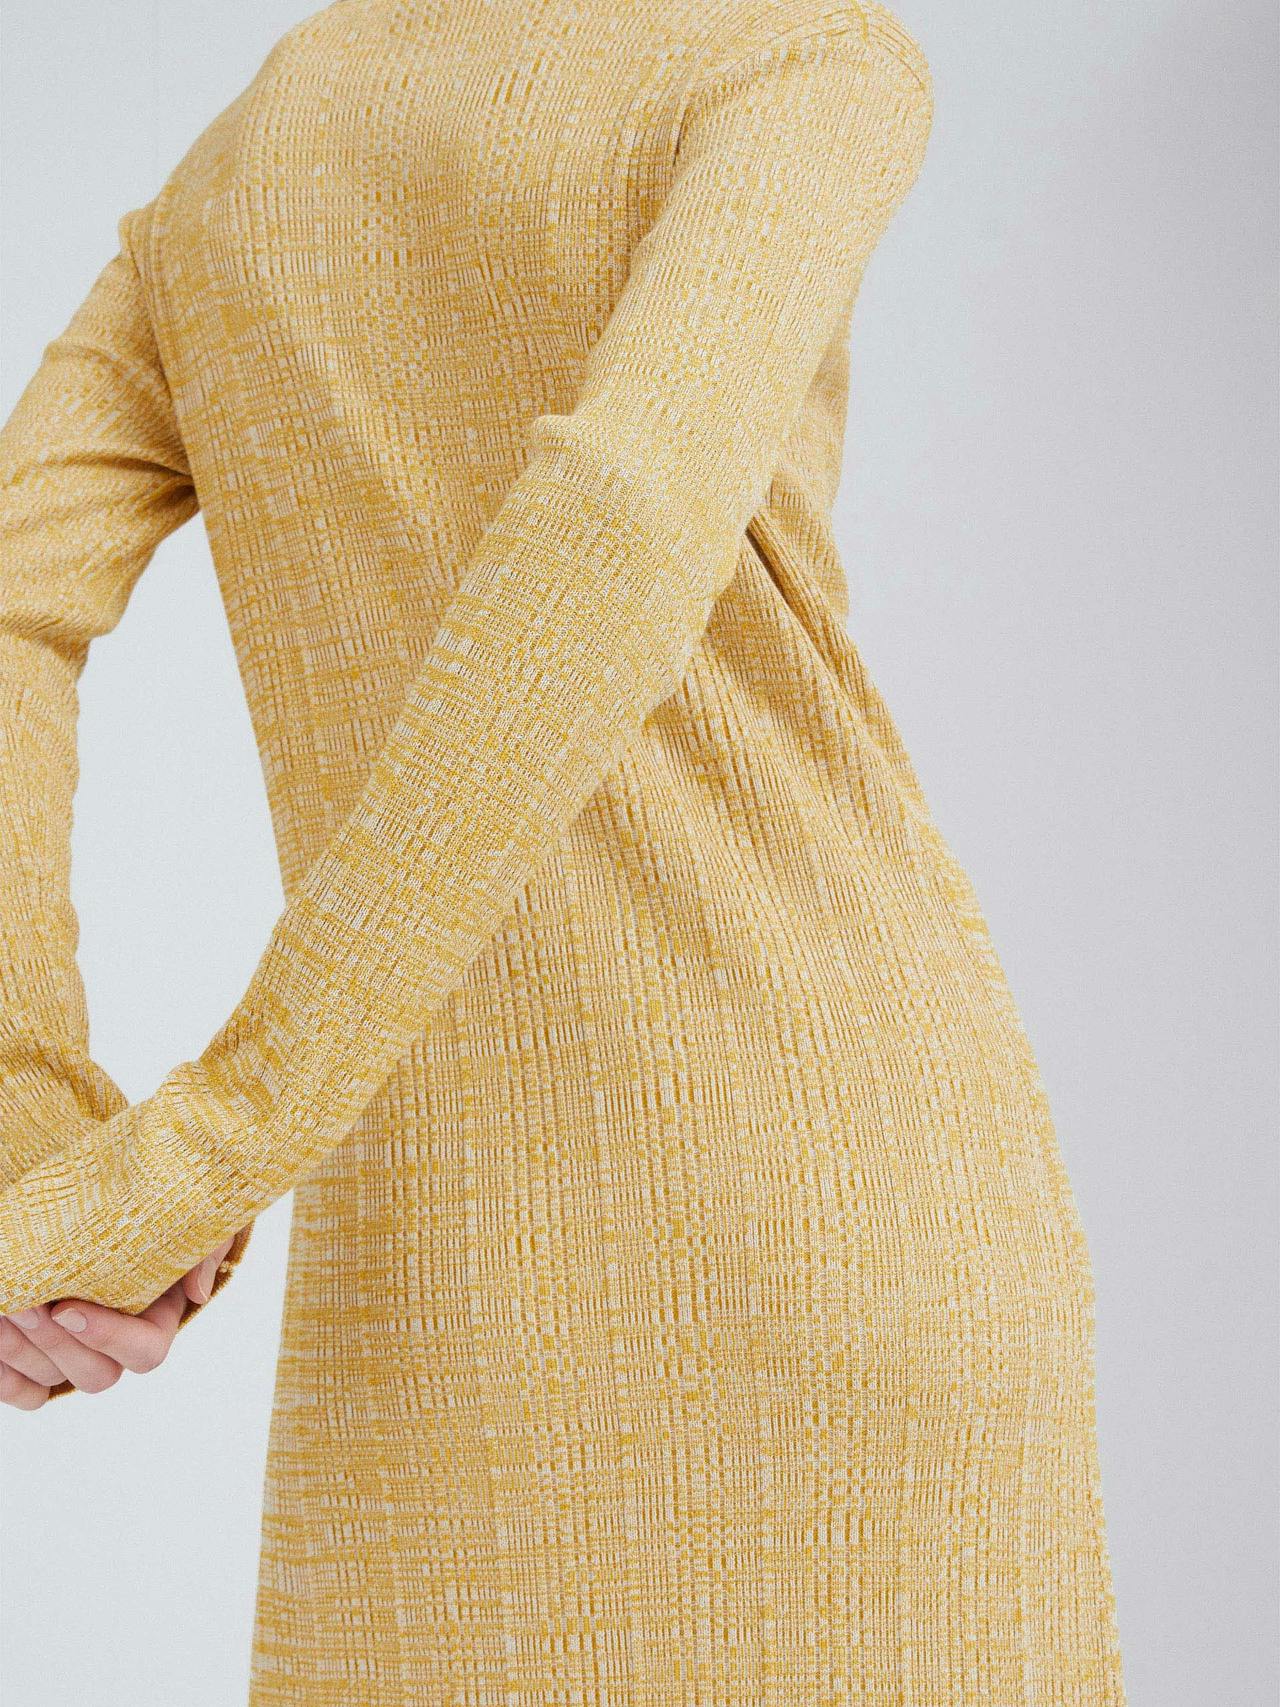 The Patti yellow dress by Issue Twelve skims the body down to below the knee. Fastened down the centre by buttons. A perfect Autumn Winter knit dress. Collagerie.com